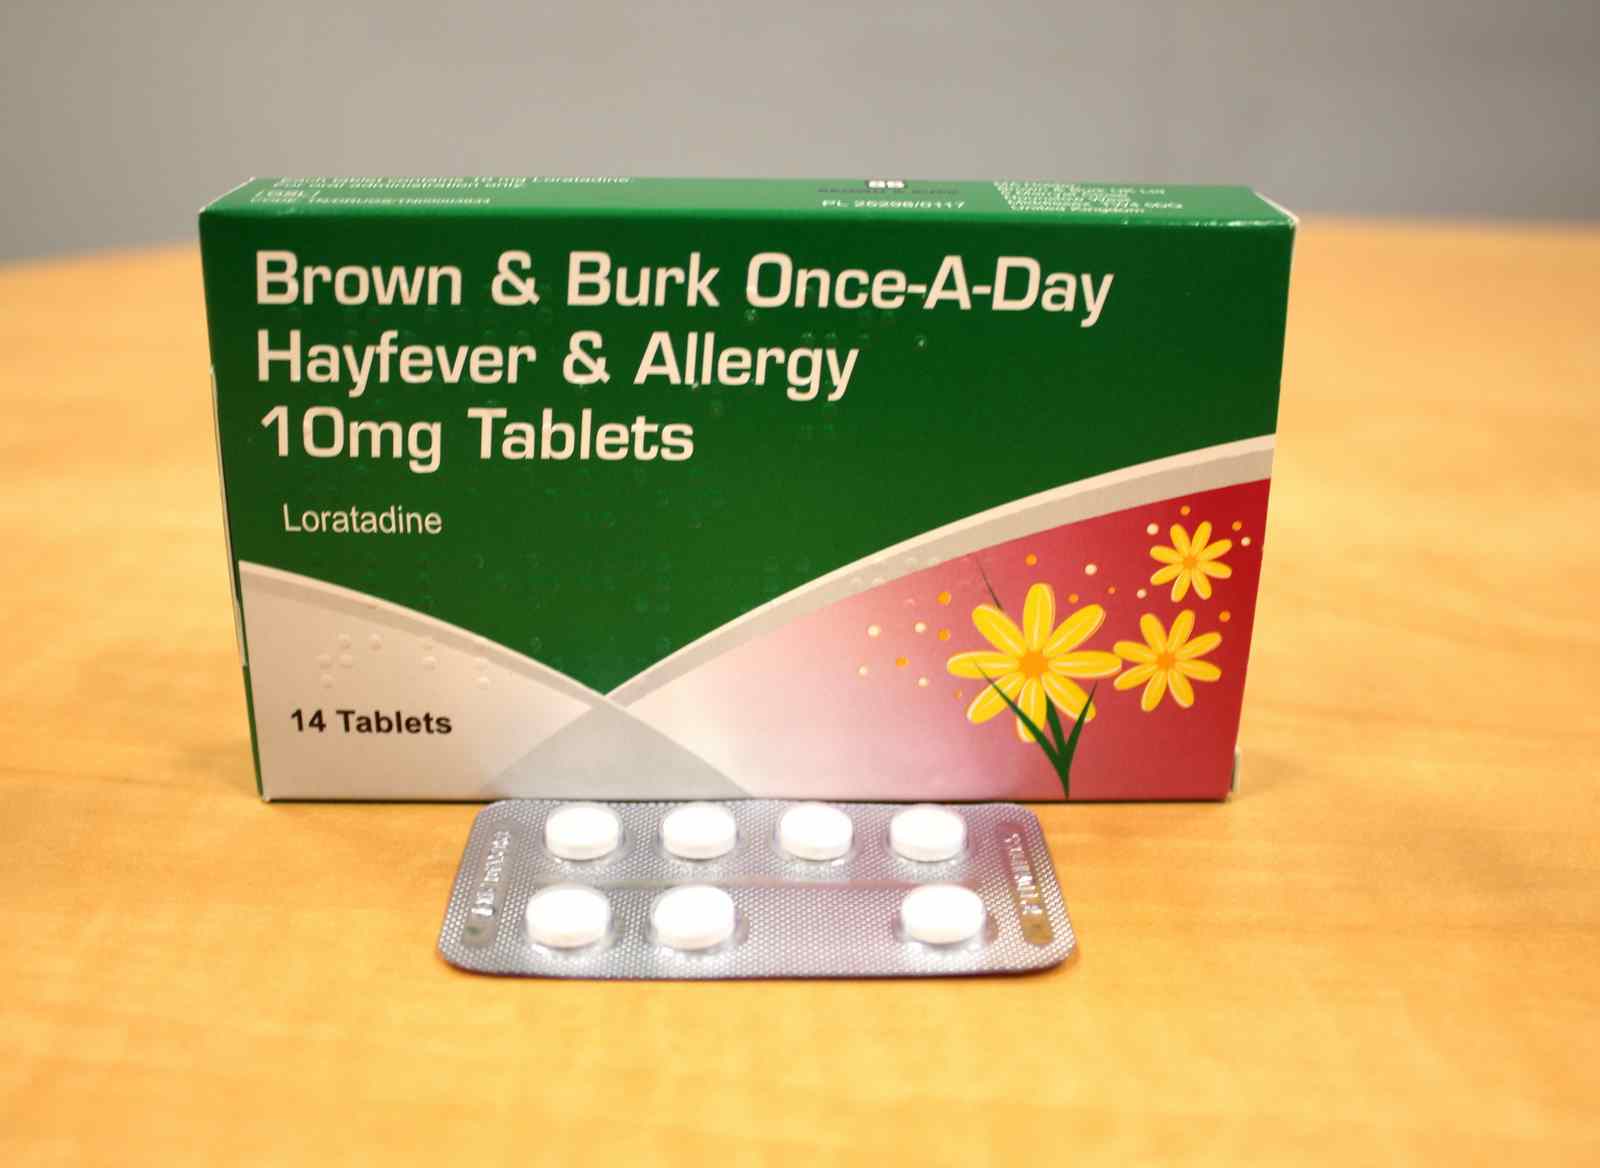 Once -A-Day Hayfever & Allergy 10 mg Tablets - Brown & Burk